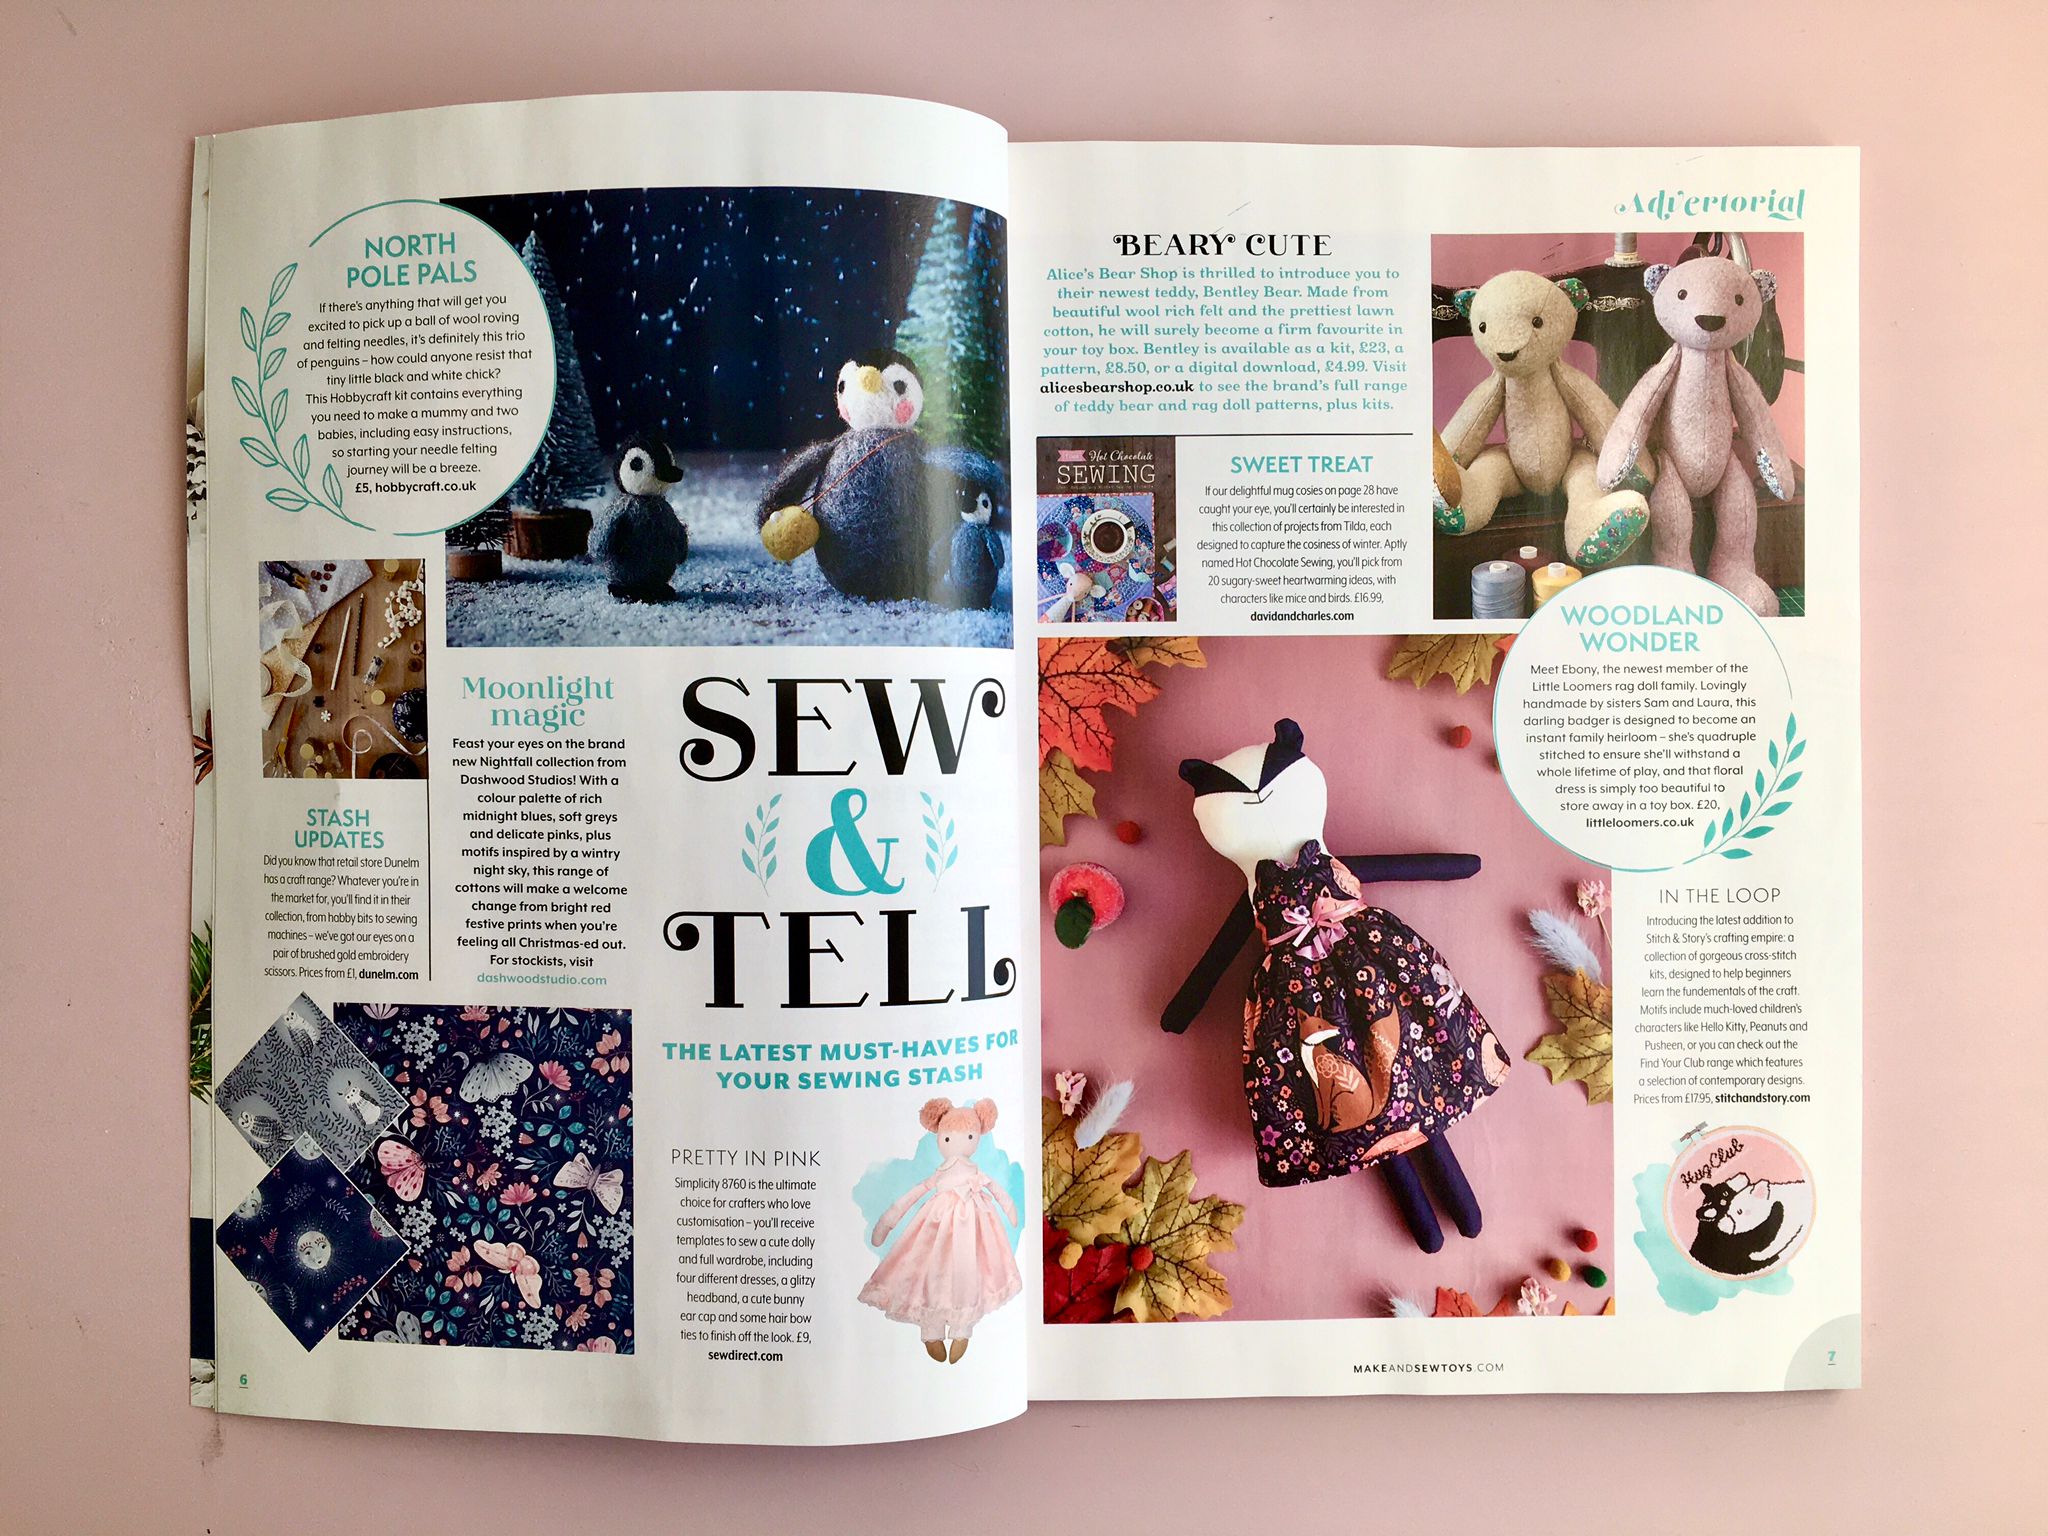 Little Loomers So Lovely To See Ebony In Makeandsewtoys Magazine Thank You Make And Sew Magazine X Handmade Sewing Giftideas Magazine T Co Csav92l5fu Twitter